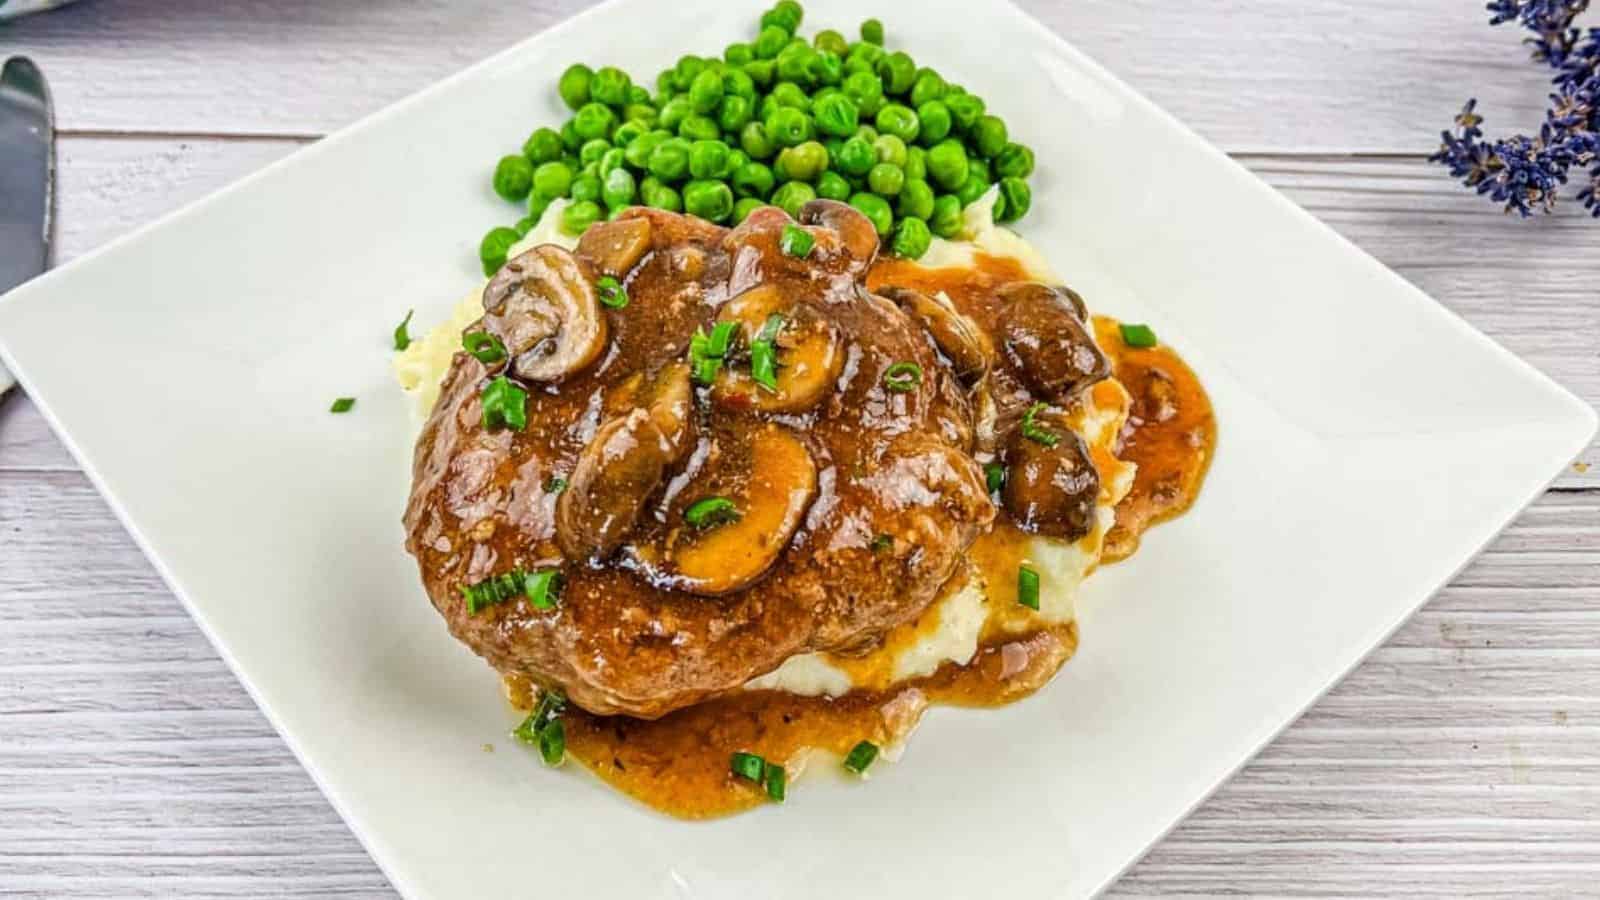 A white plate with Salisbury steak topped with mushroom gravy on mashed potatoes, accompanied by a side of green peas.